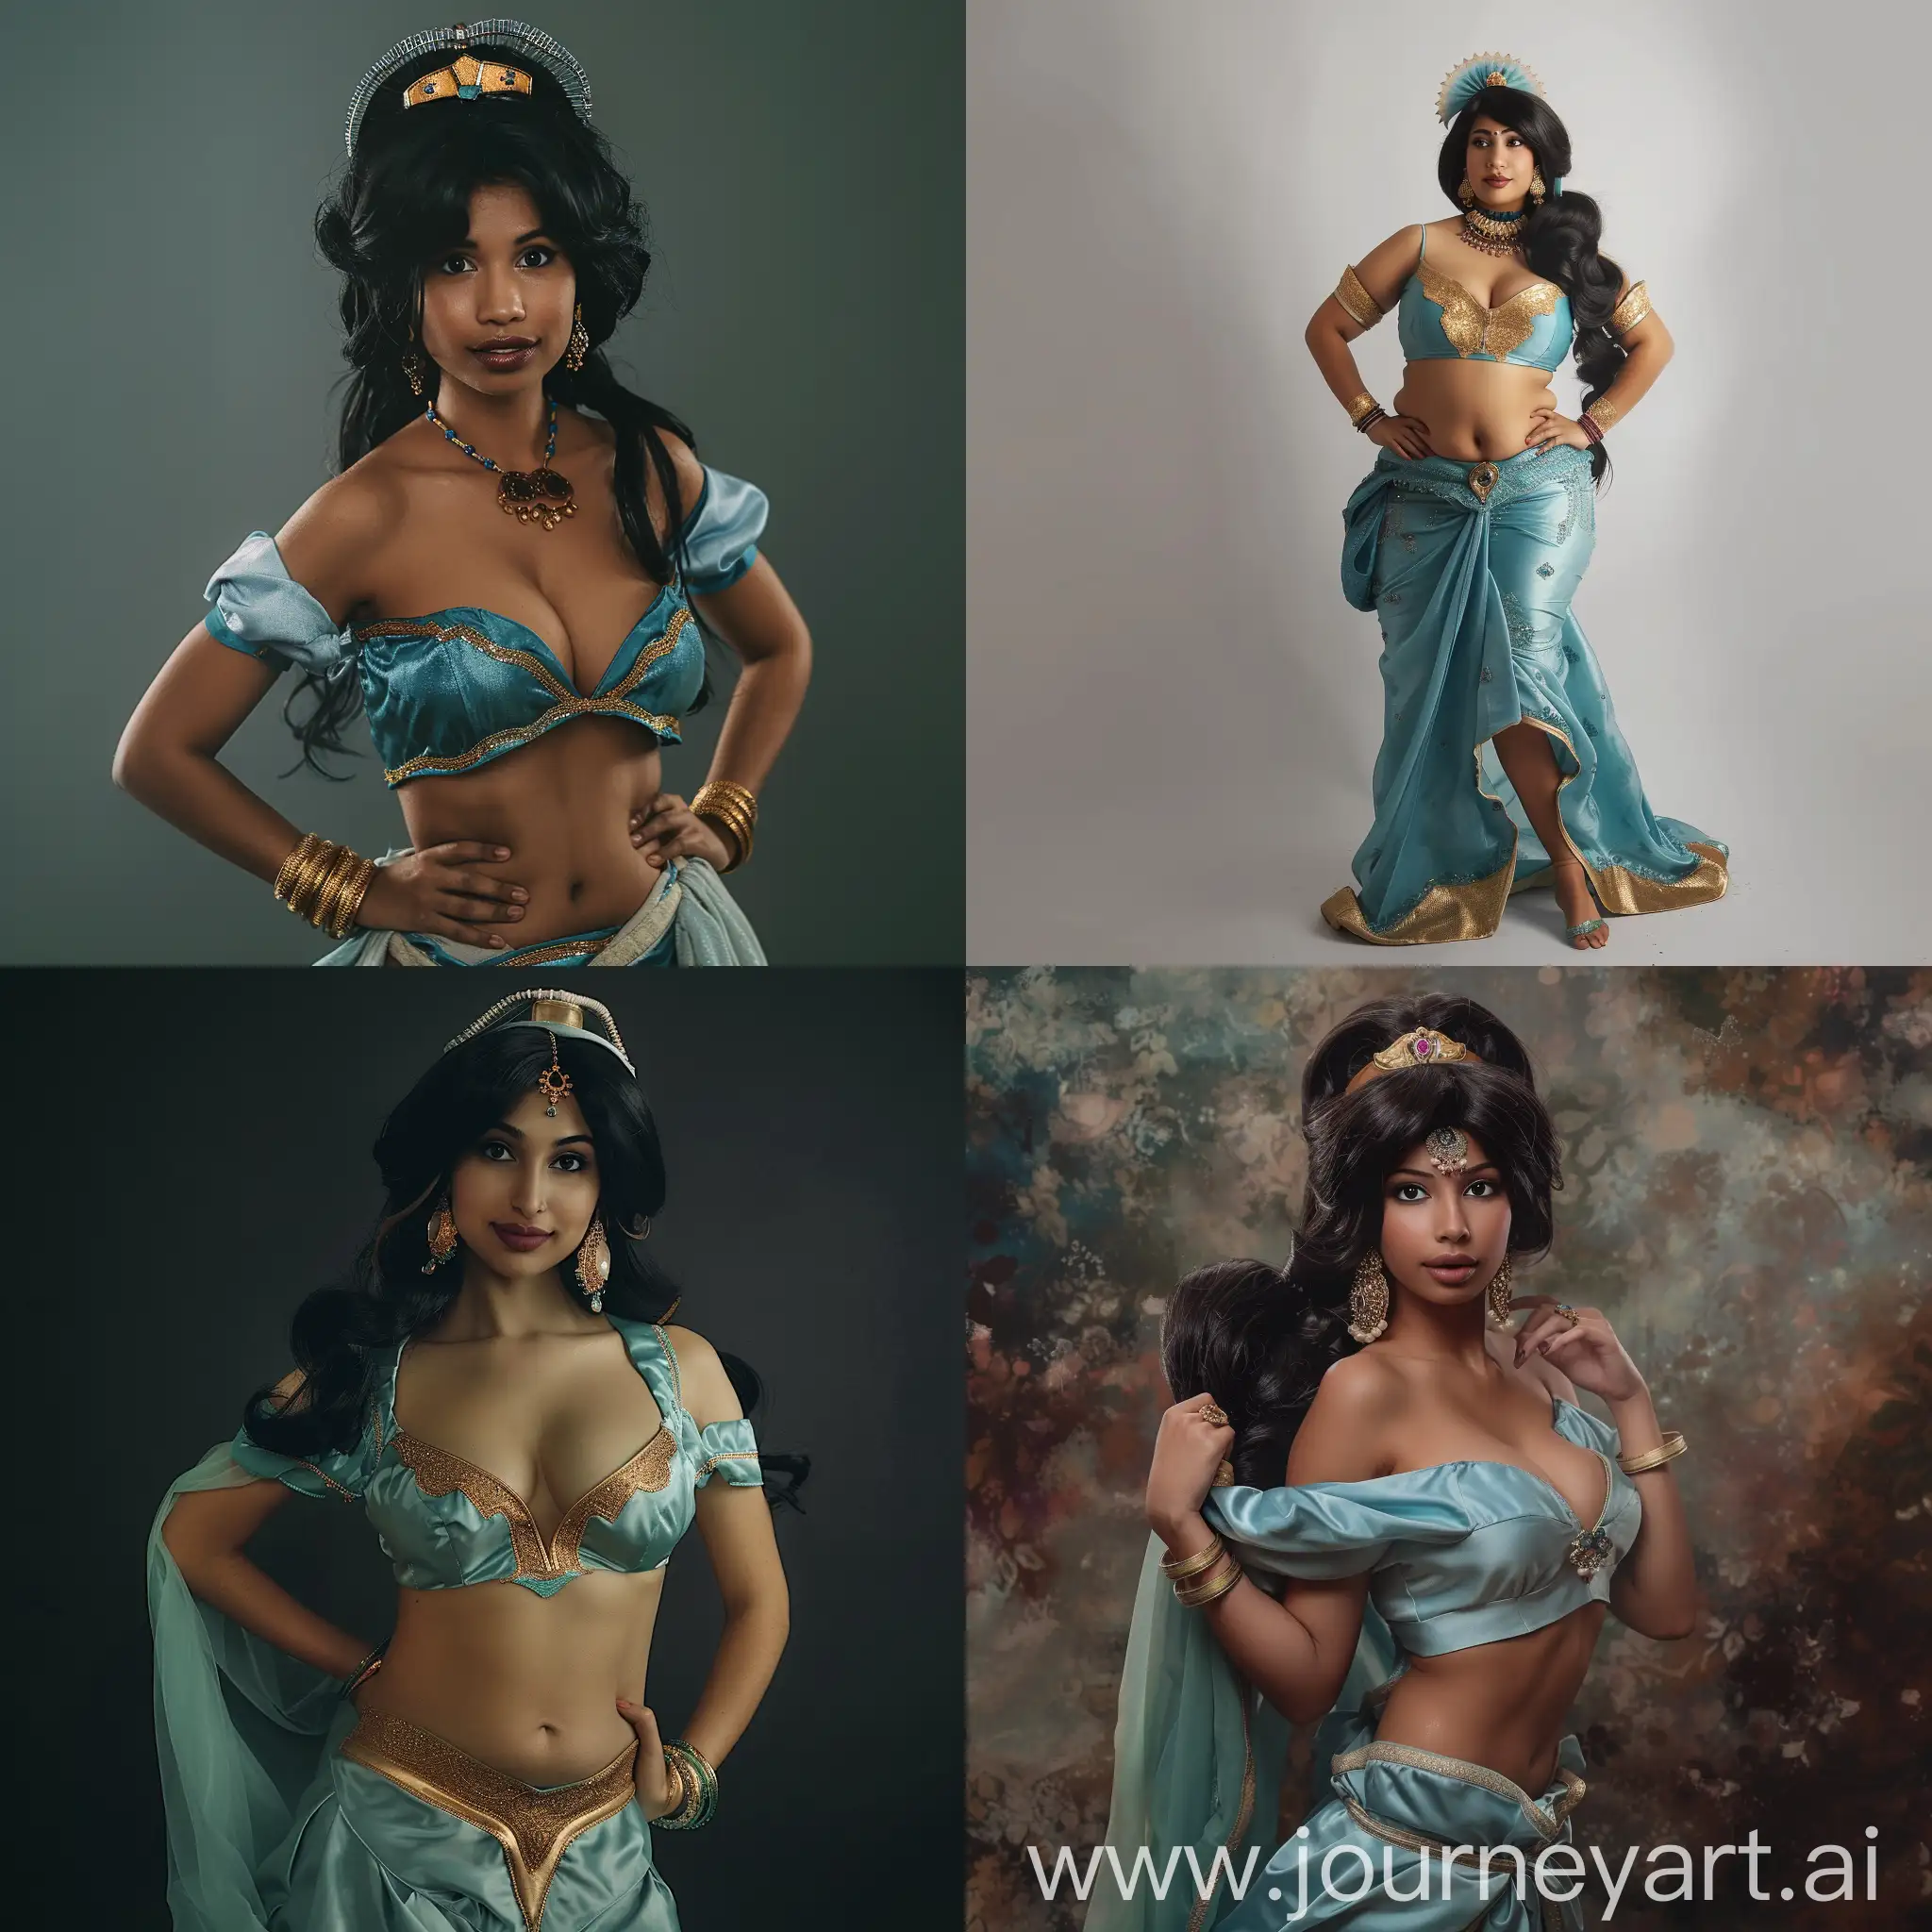 full-body shot photograph from the front view angle of a 26-28 year old, average height, slightly chubby, slightly fair complexion Indian woman dressed as the iconic character Jasmine from Disney's Aladdin, with a Jasmine-style hair, posing confidently in front of the camera, capturing an air of beauty,  Ultra-realistic photo